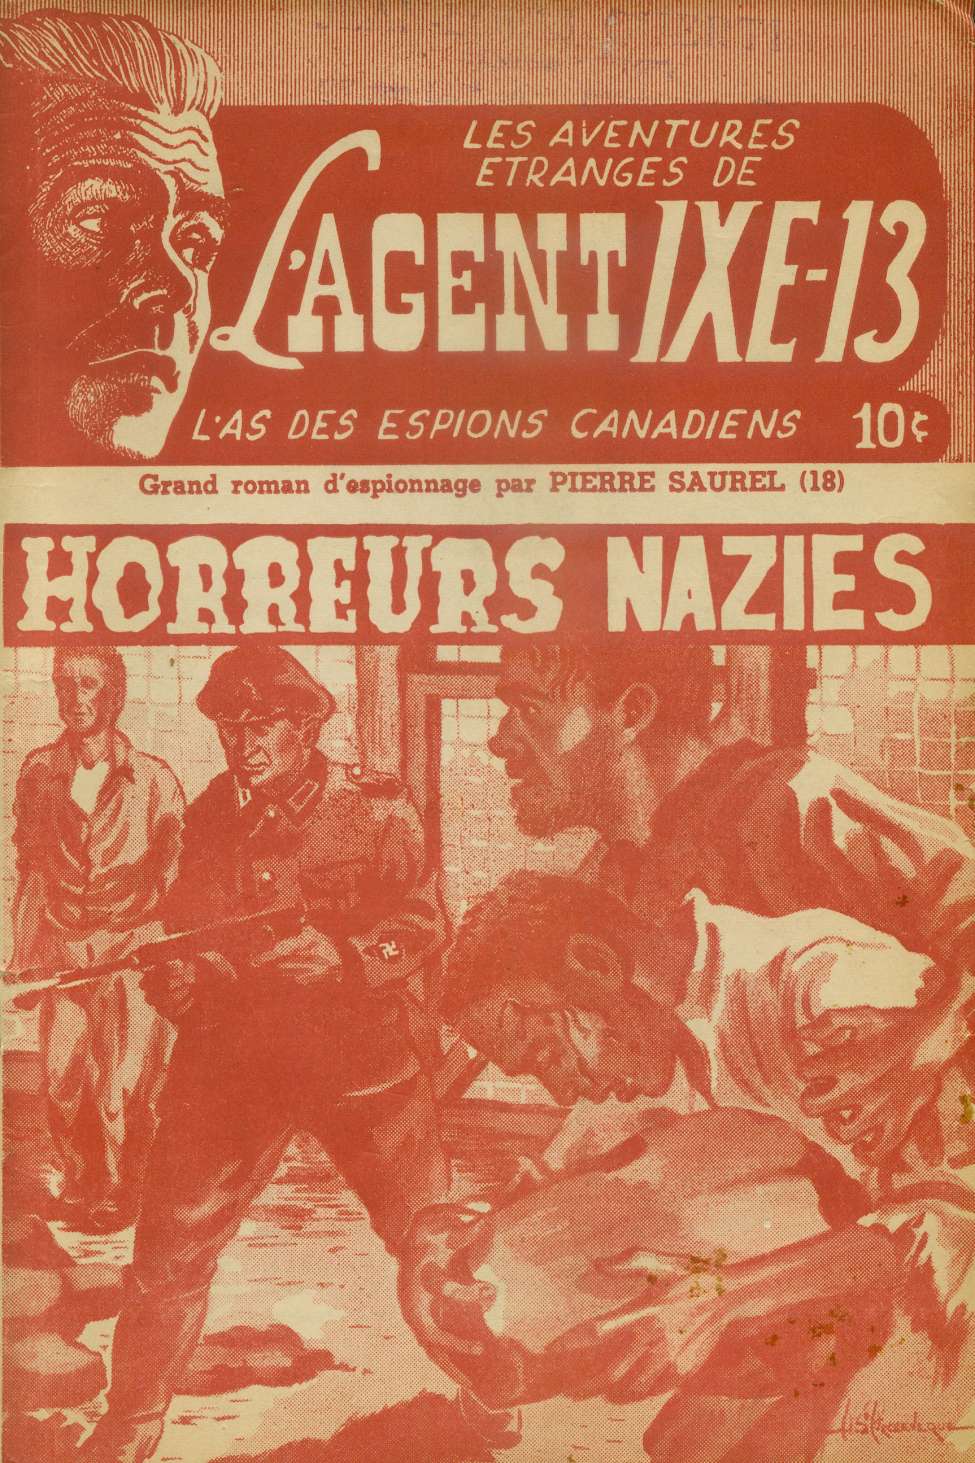 Comic Book Cover For L'Agent IXE-13 v2 18 - Horreurs nazies